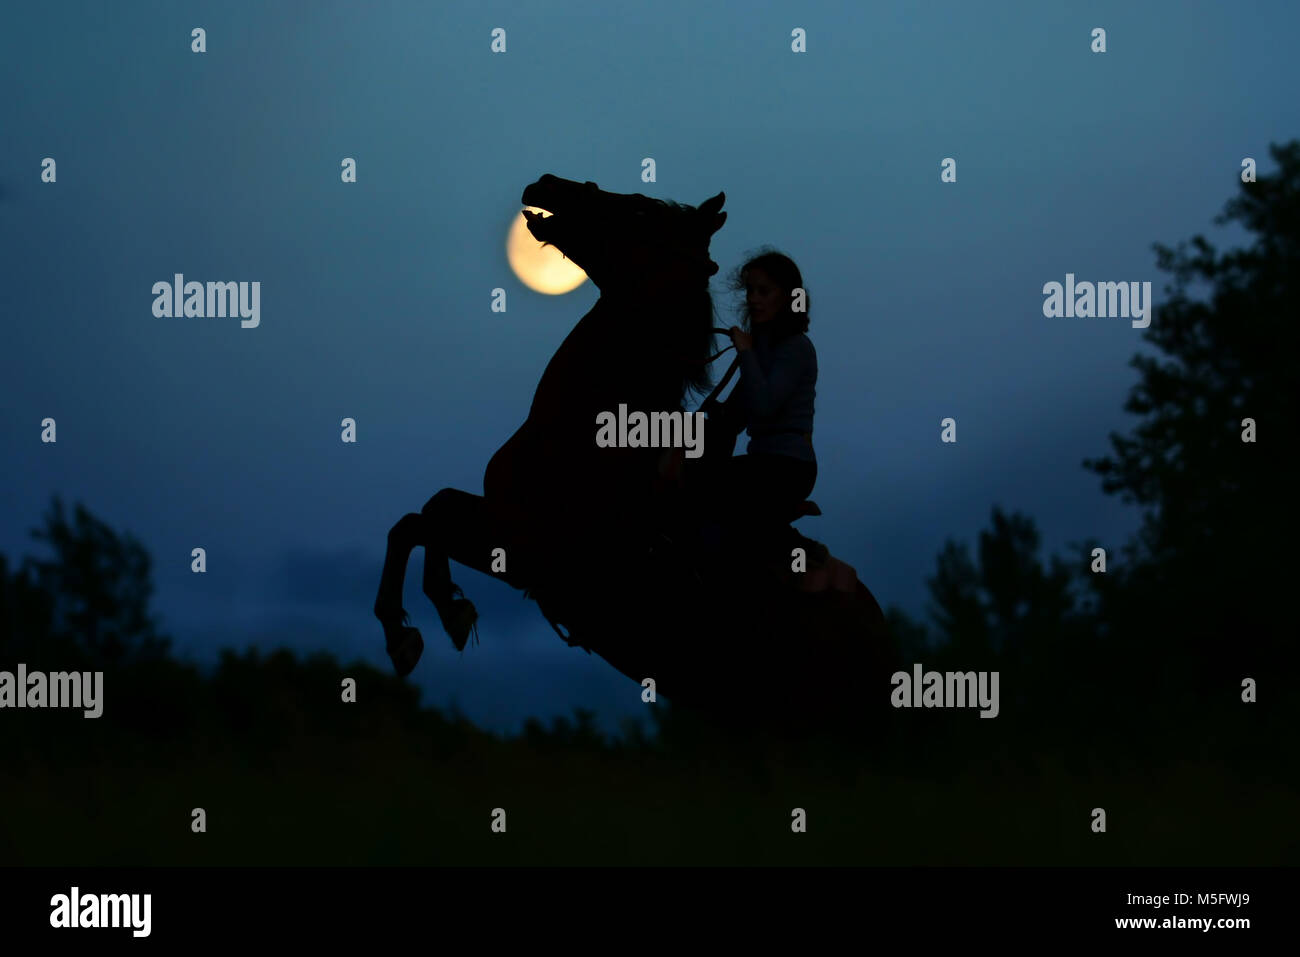 Rearing horse with rider under full moon in night. Fantasy moonlight silhouette of wild stallion with rider under full moon atmosphere background Stock Photo